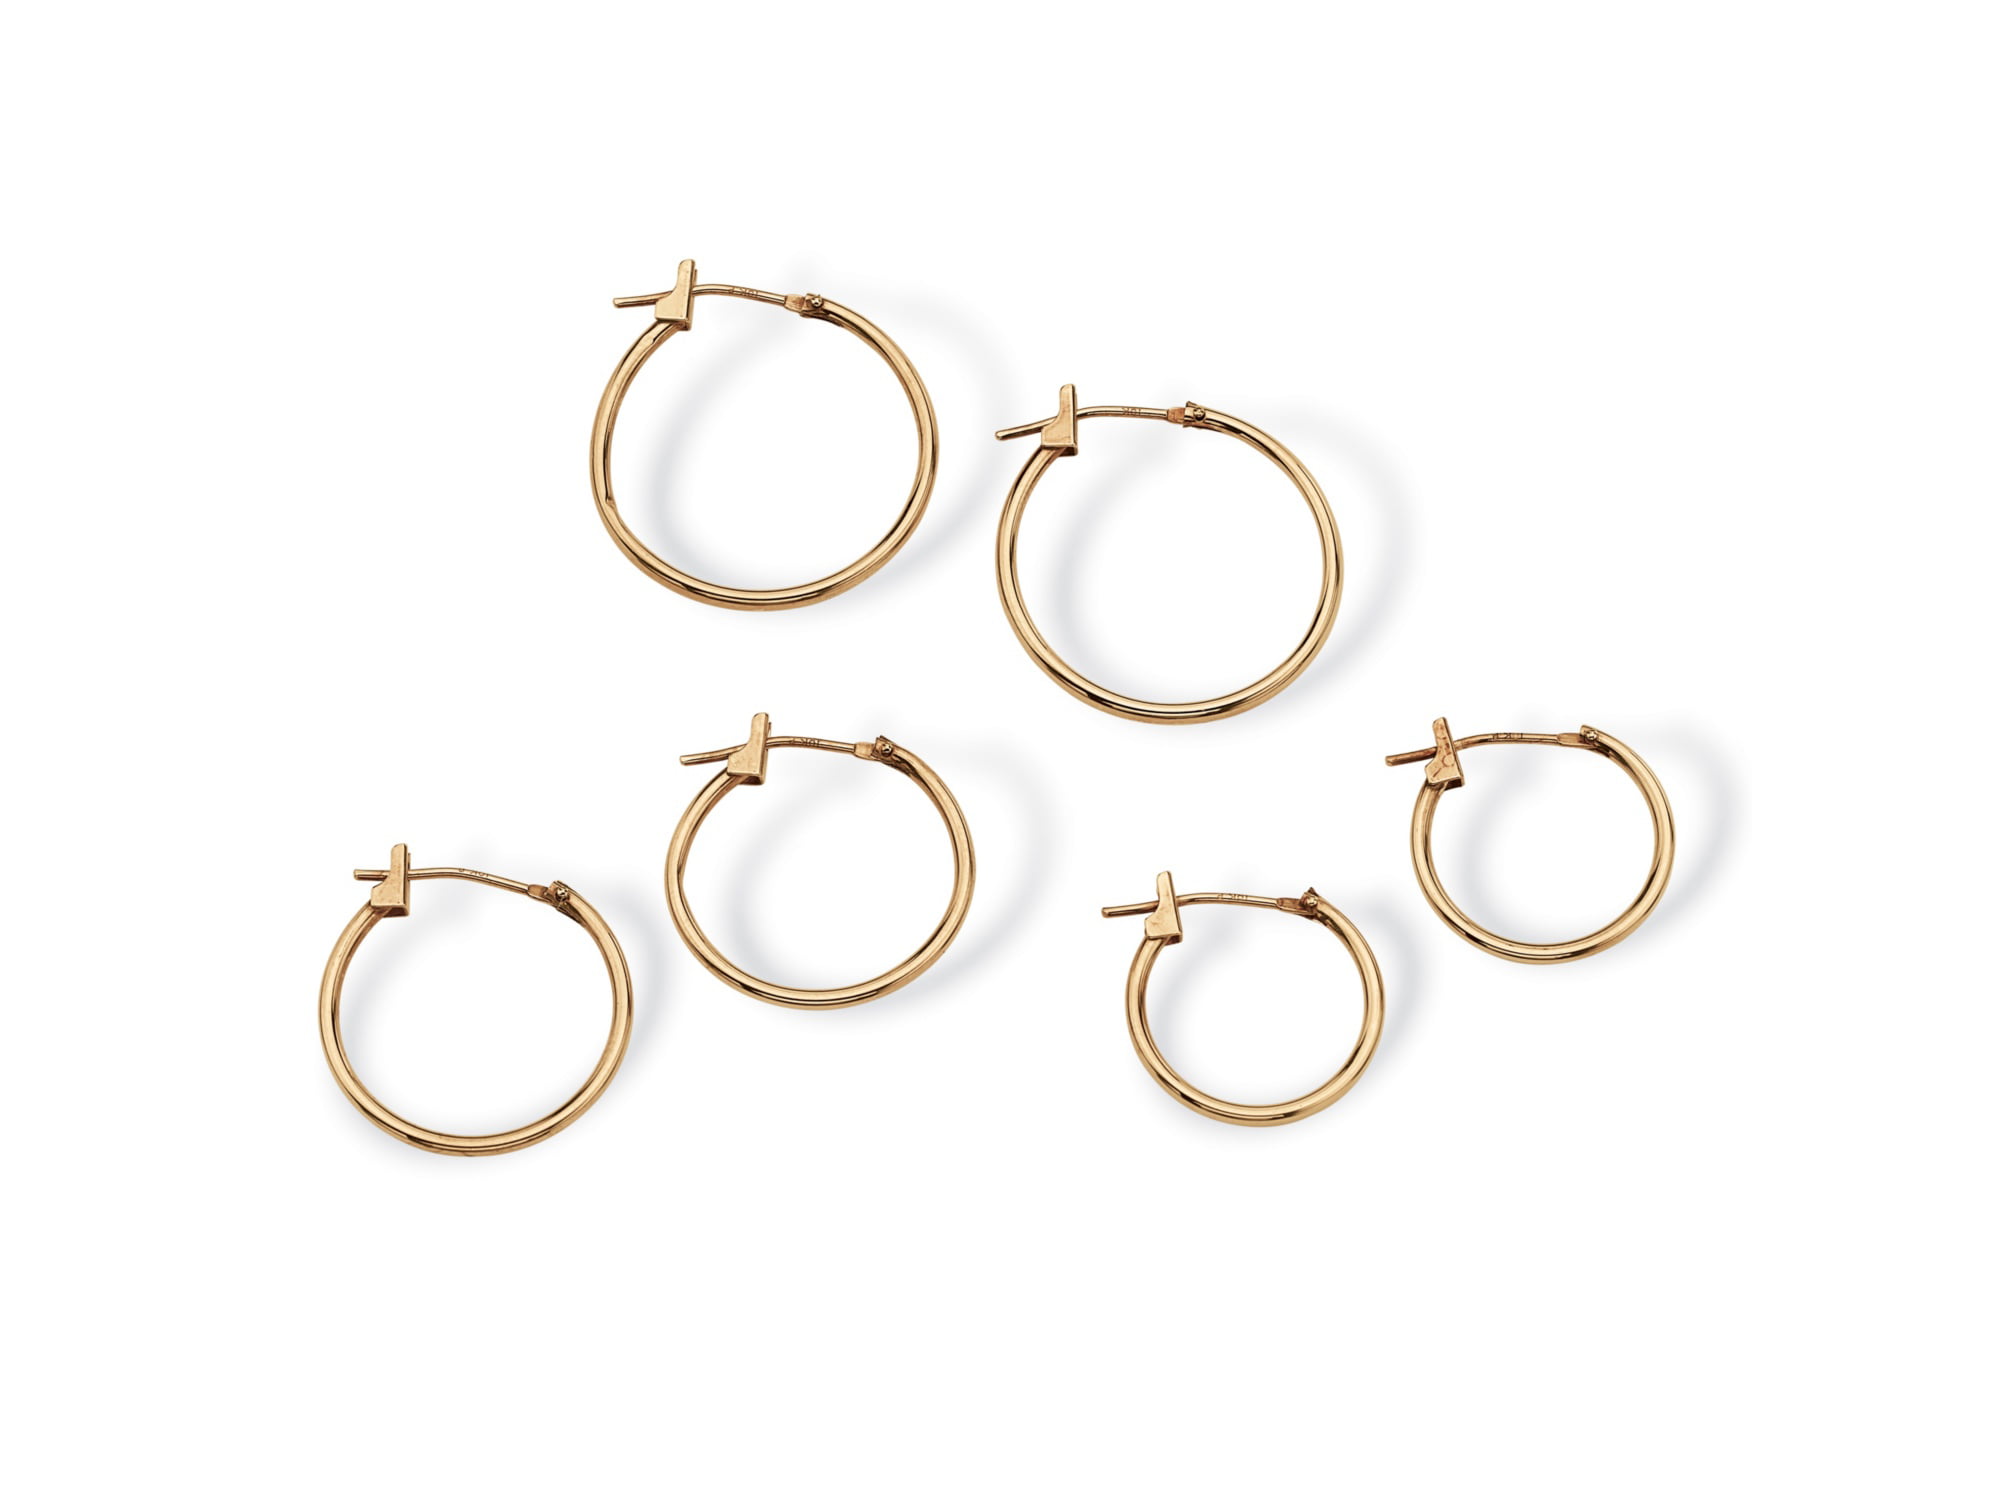 Awesome New Classic Yellow Gold Plated Smooth and Shiny 1.75 Round Hoop Earrings for Women Lady